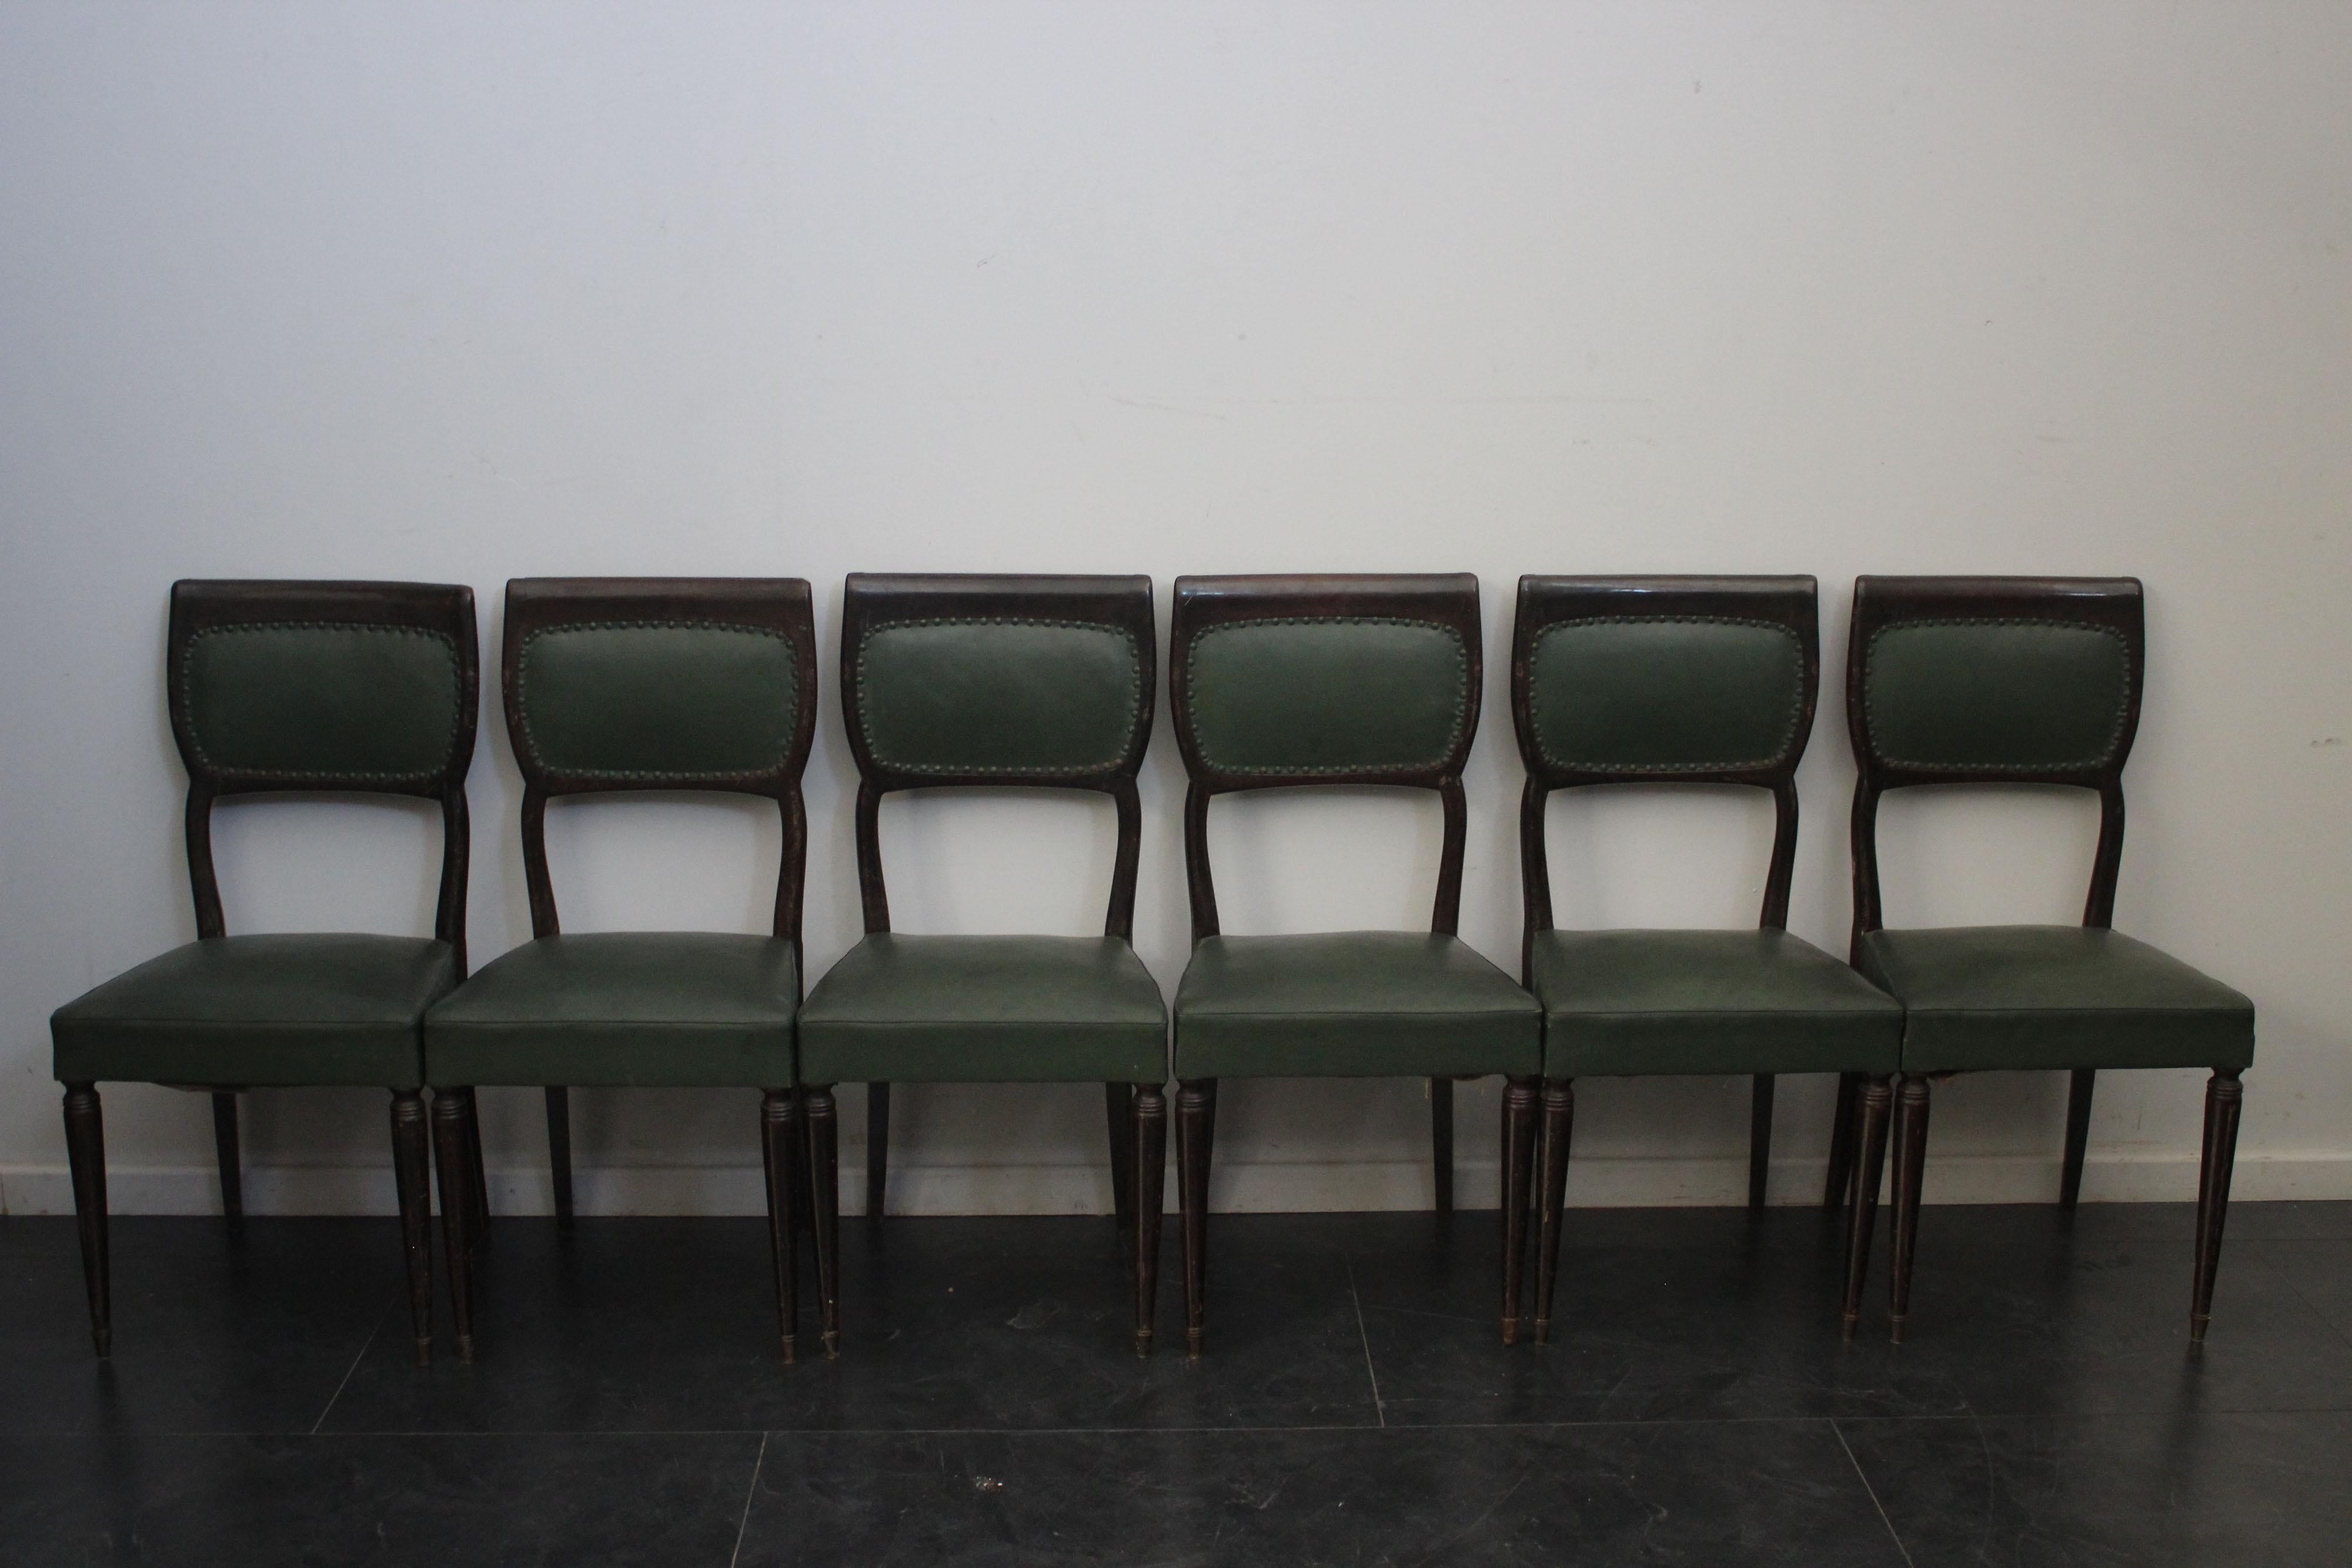 Set of six chairs attributed to Vittorio Dassi, 1950s. Ebonized beech structure, green leatherette seat and backrest, brass tips.
Piece attributed to the above designer. It has no hallmark or proof of authenticity, but is documented in design